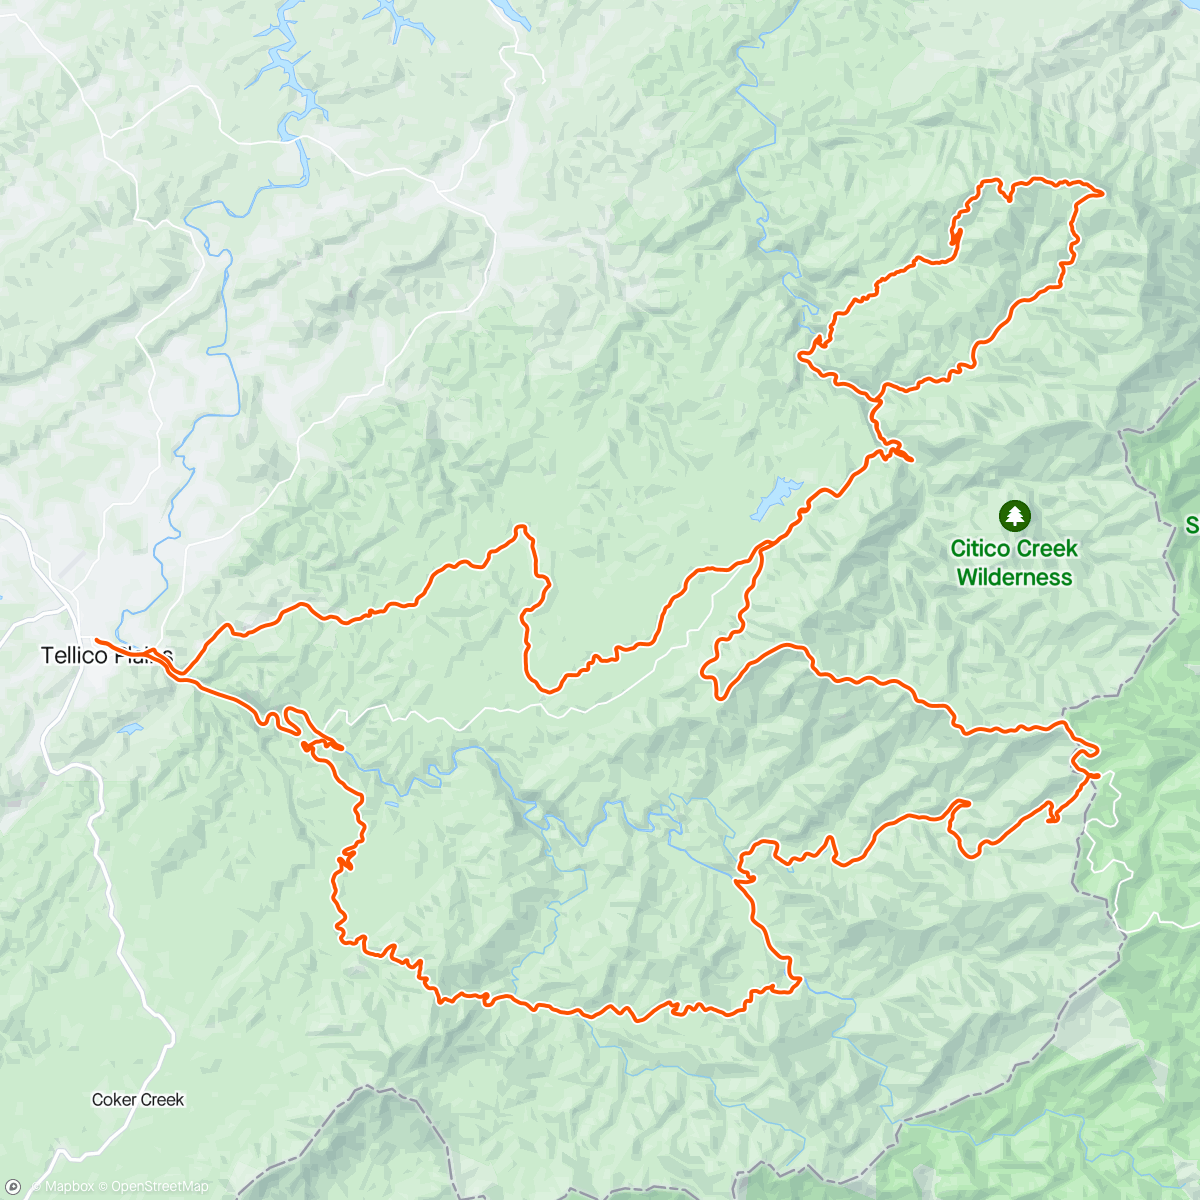 Mapa da atividade, Generally I try not to do basic endurance biking on gravel bc going uphill is too hard. But sometimes it’s the nicest day of the year and you must drive (laboriously) the nation’s most beautiful gravel route